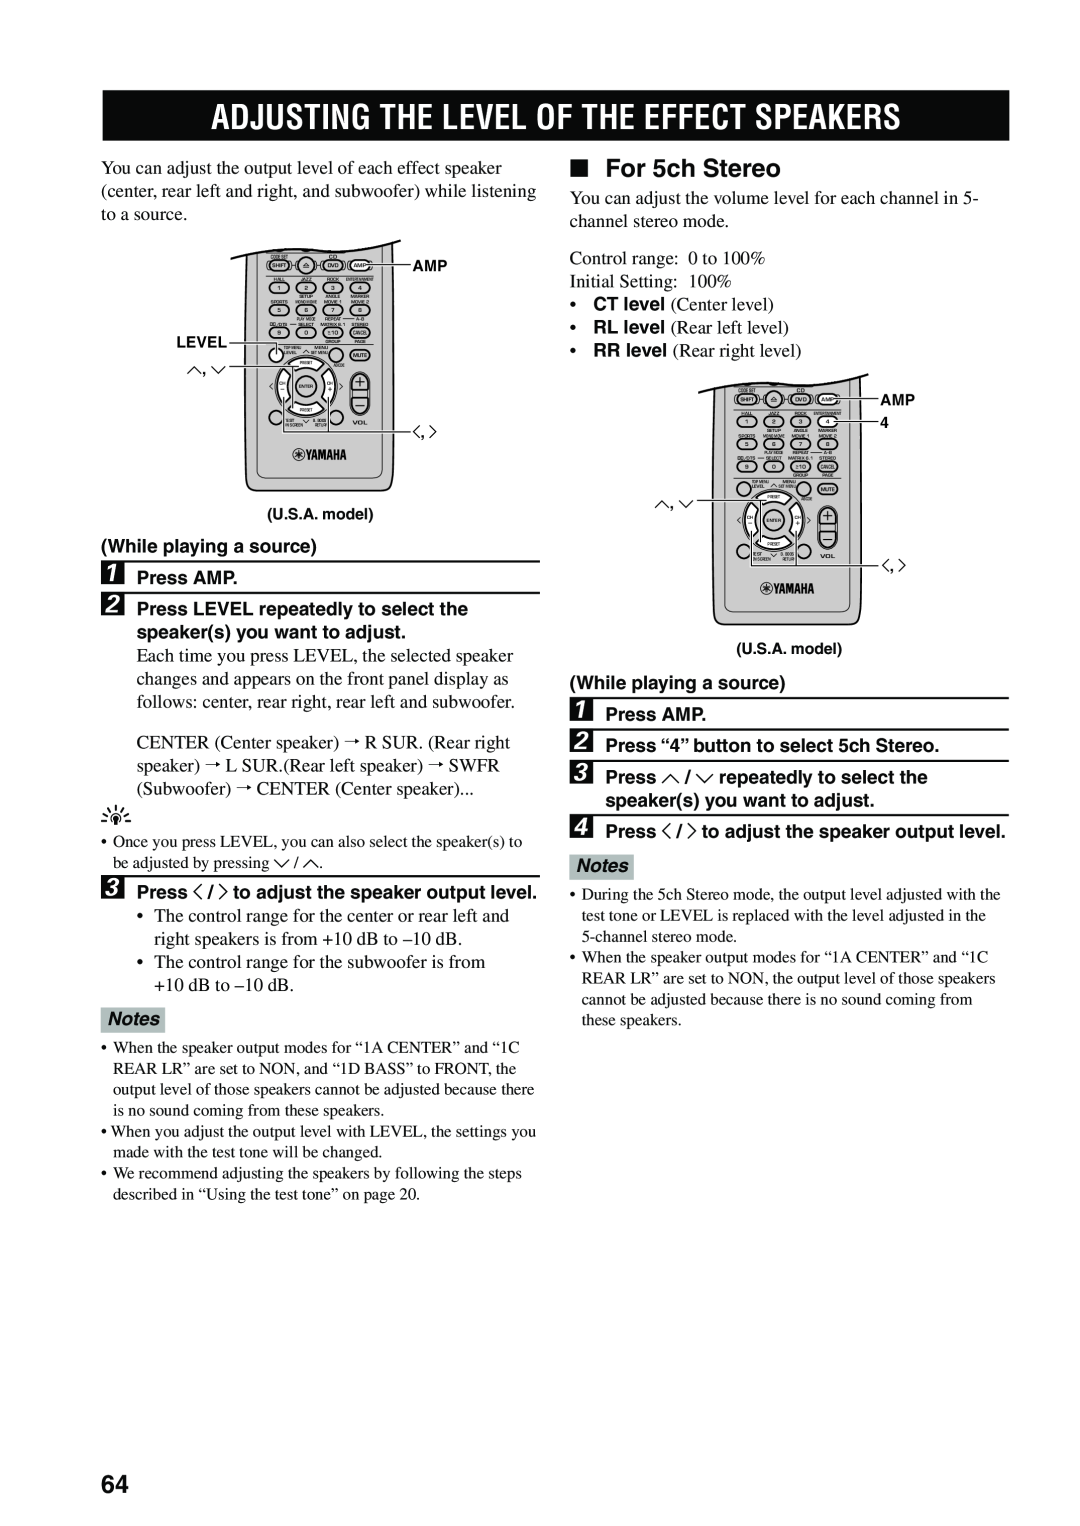 Yamaha DVX-S100 owner manual Adjusting The Level Of The Effect Speakers, For 5ch Stereo, While playing a source 1Press AMP 